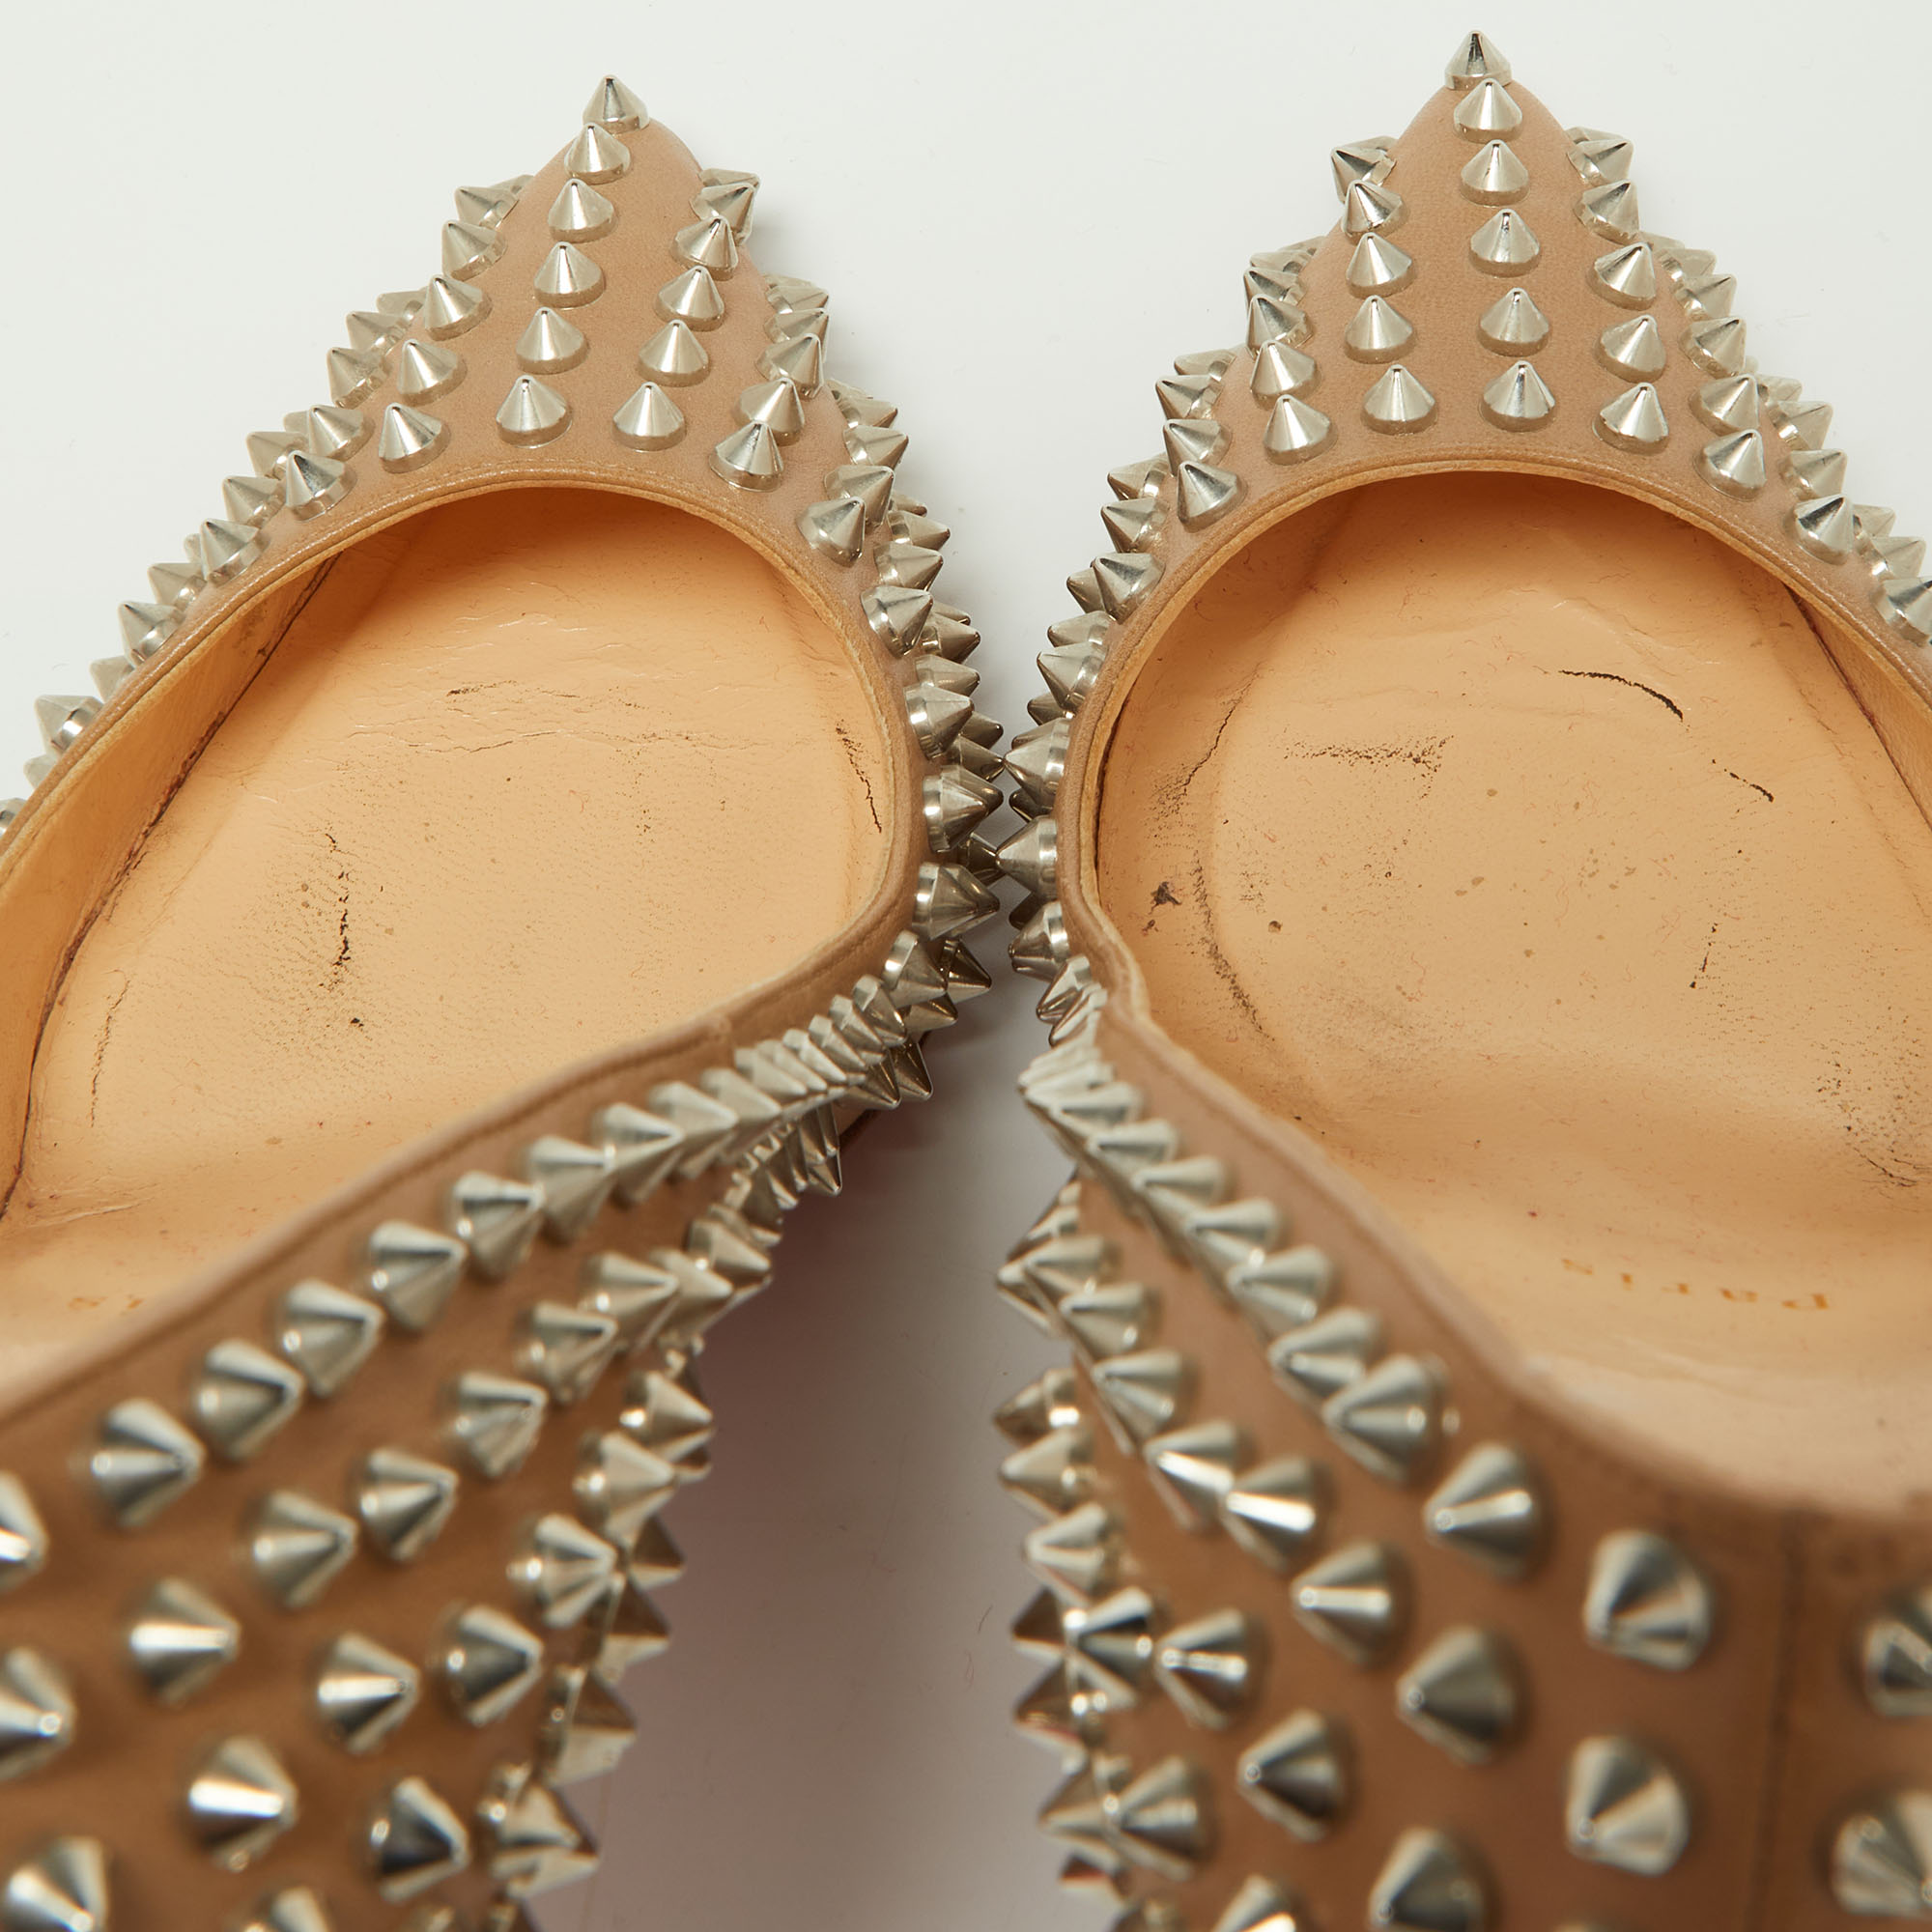 Christian Louboutin Beige Leather Pigalle Spikes Pumps Size 39.5